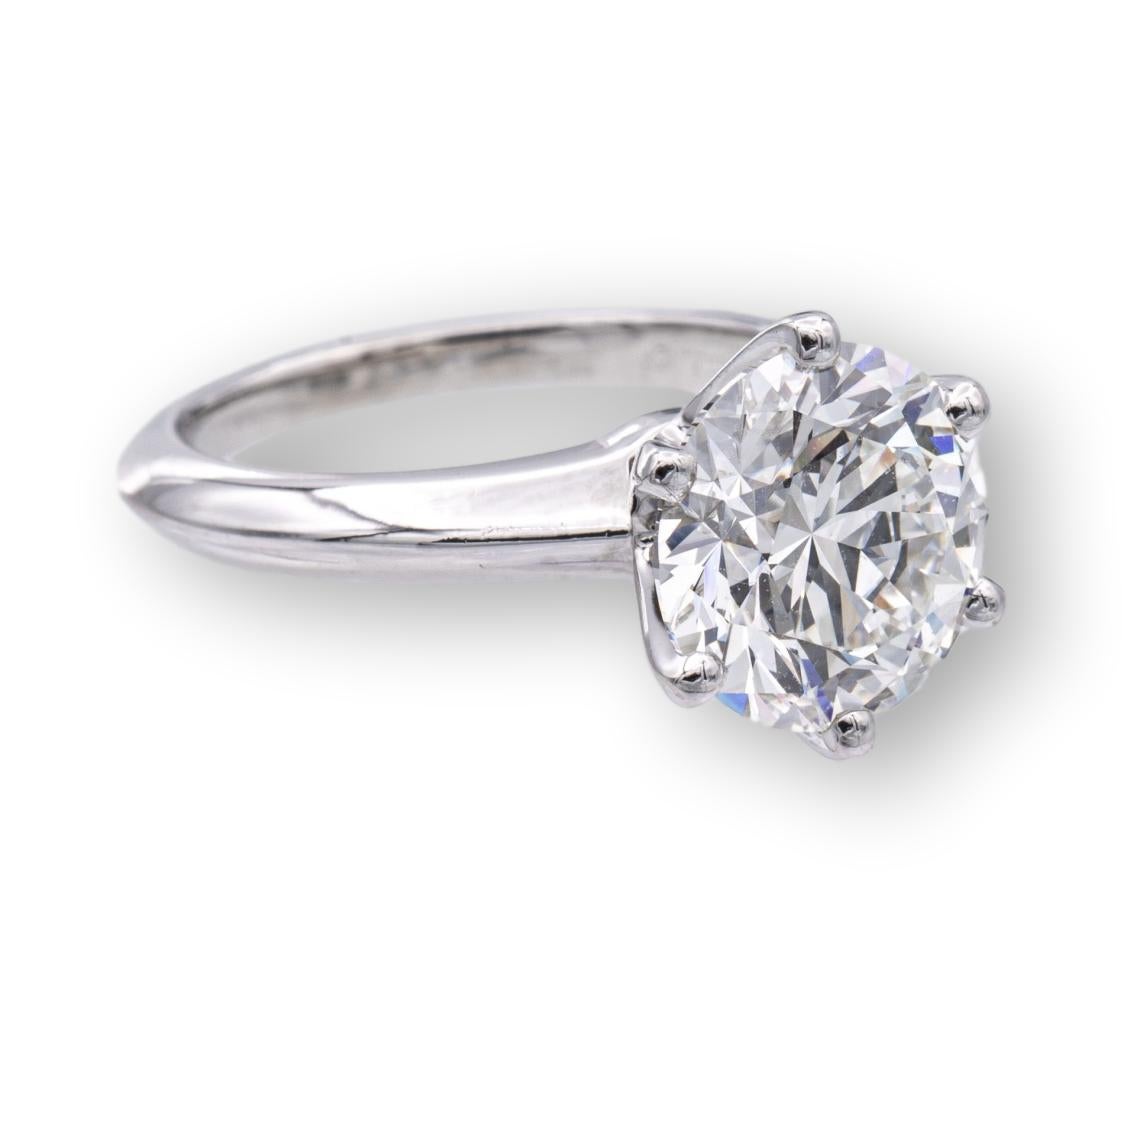 Tiffany & Co Platinum Solitaire Engagement Ring finely crafted in a six prong platinum mounting with one round brilliant cut diamond center weighing 2.76 cts G color VS1 clarity. Diamond is extremely bright and brilliant. Tiffany's diamond